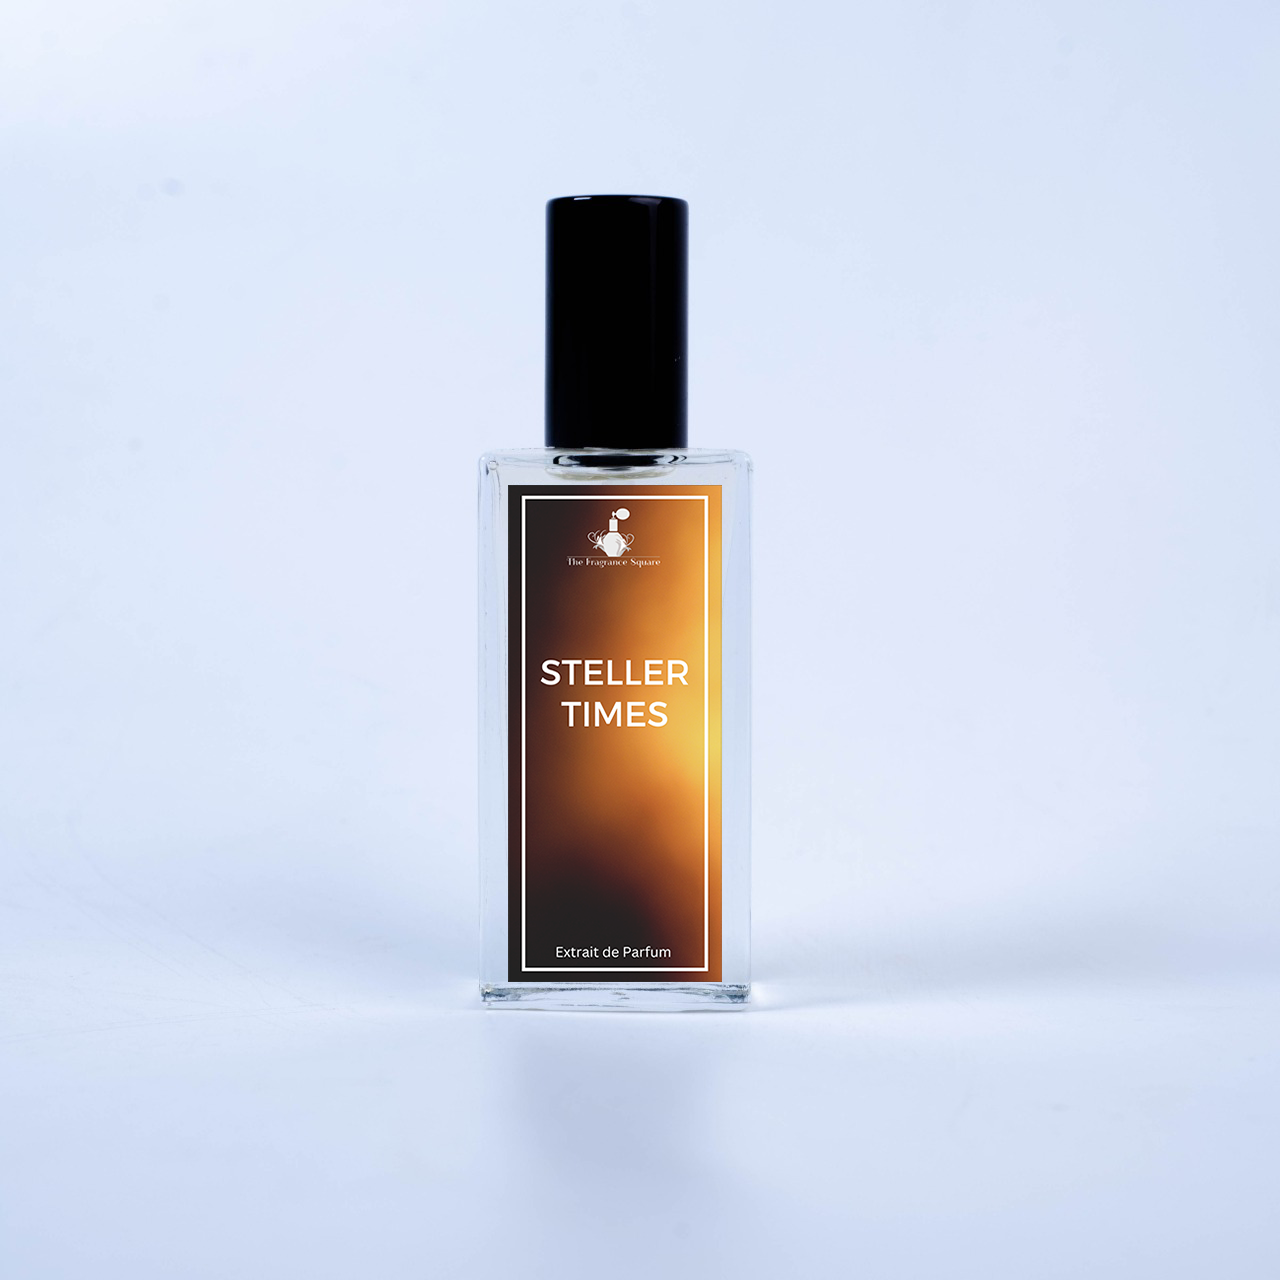 Our Rendition of Steller Times – The Fragrance Square